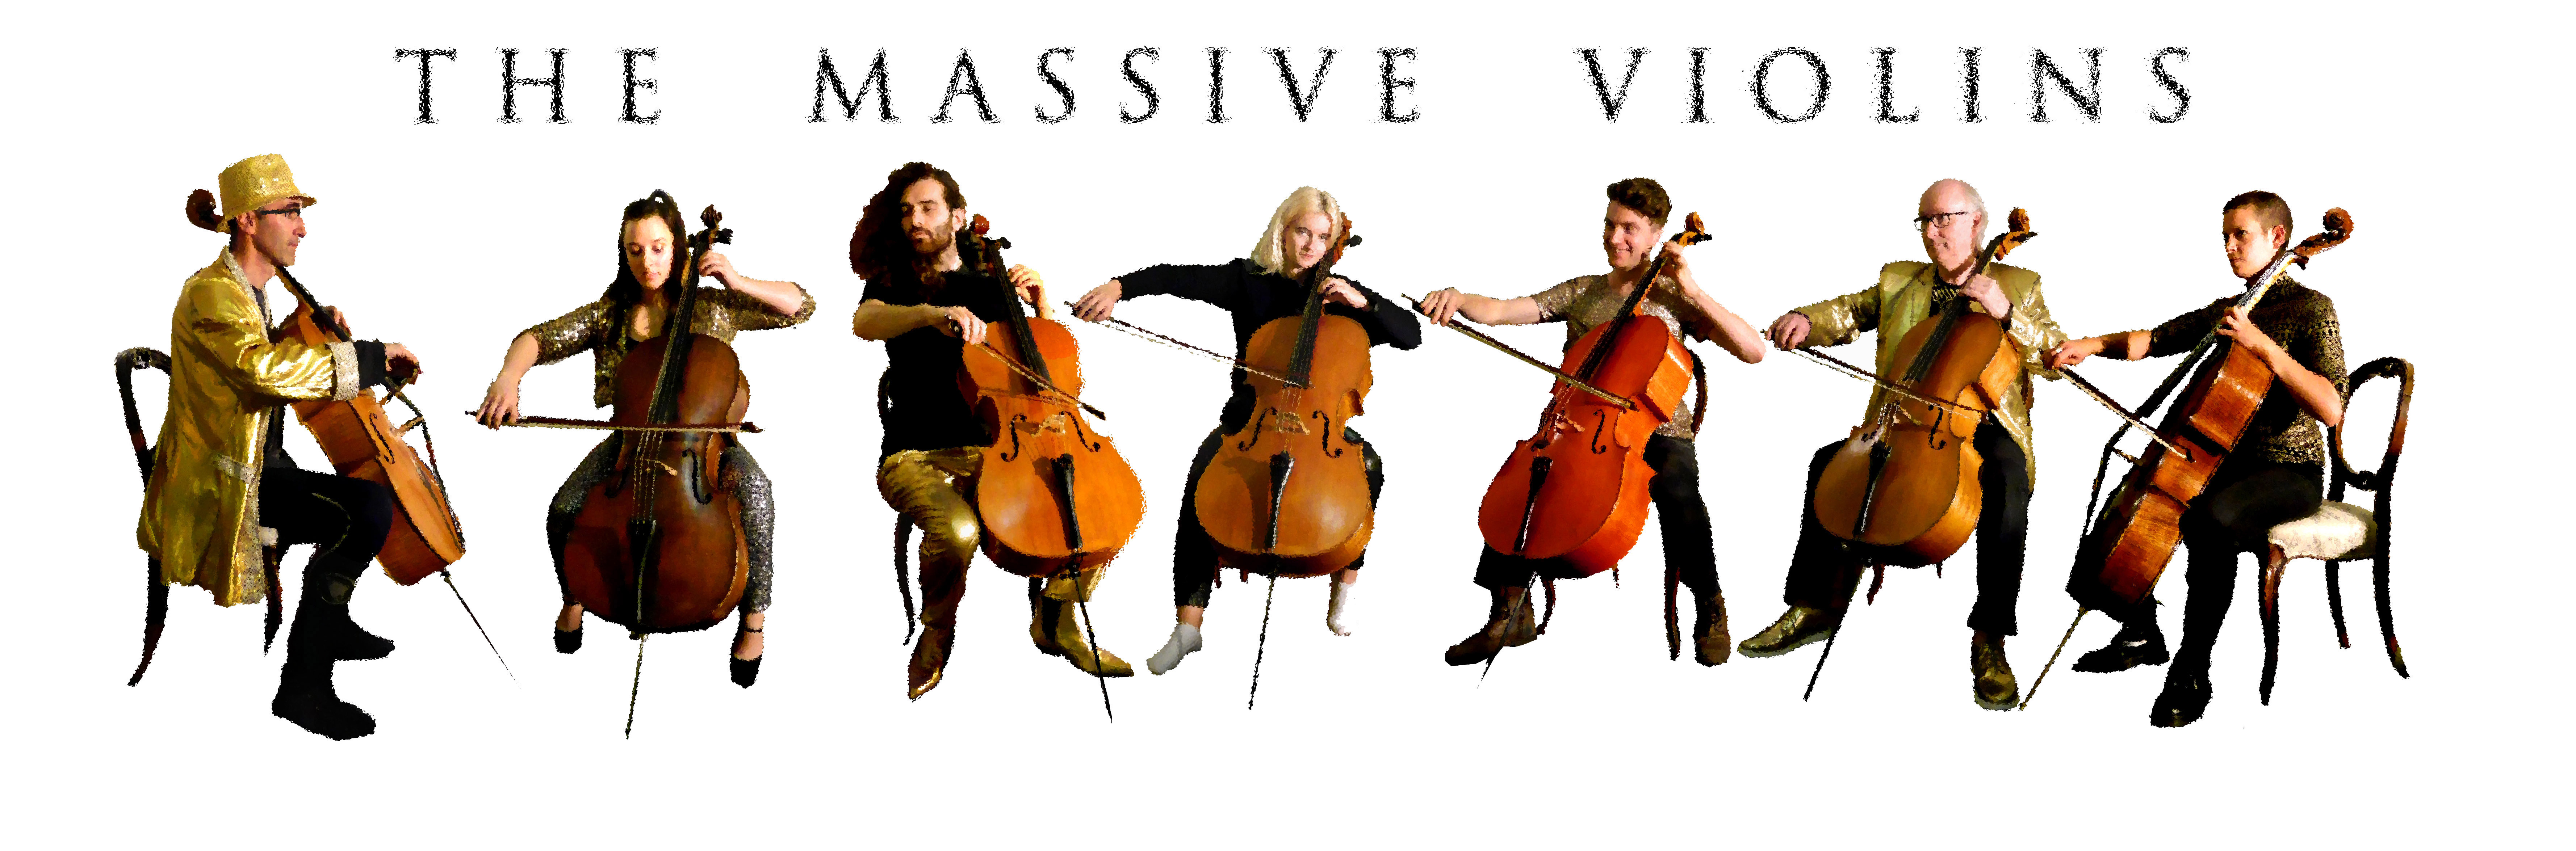 The Massive Violins are coming to South London